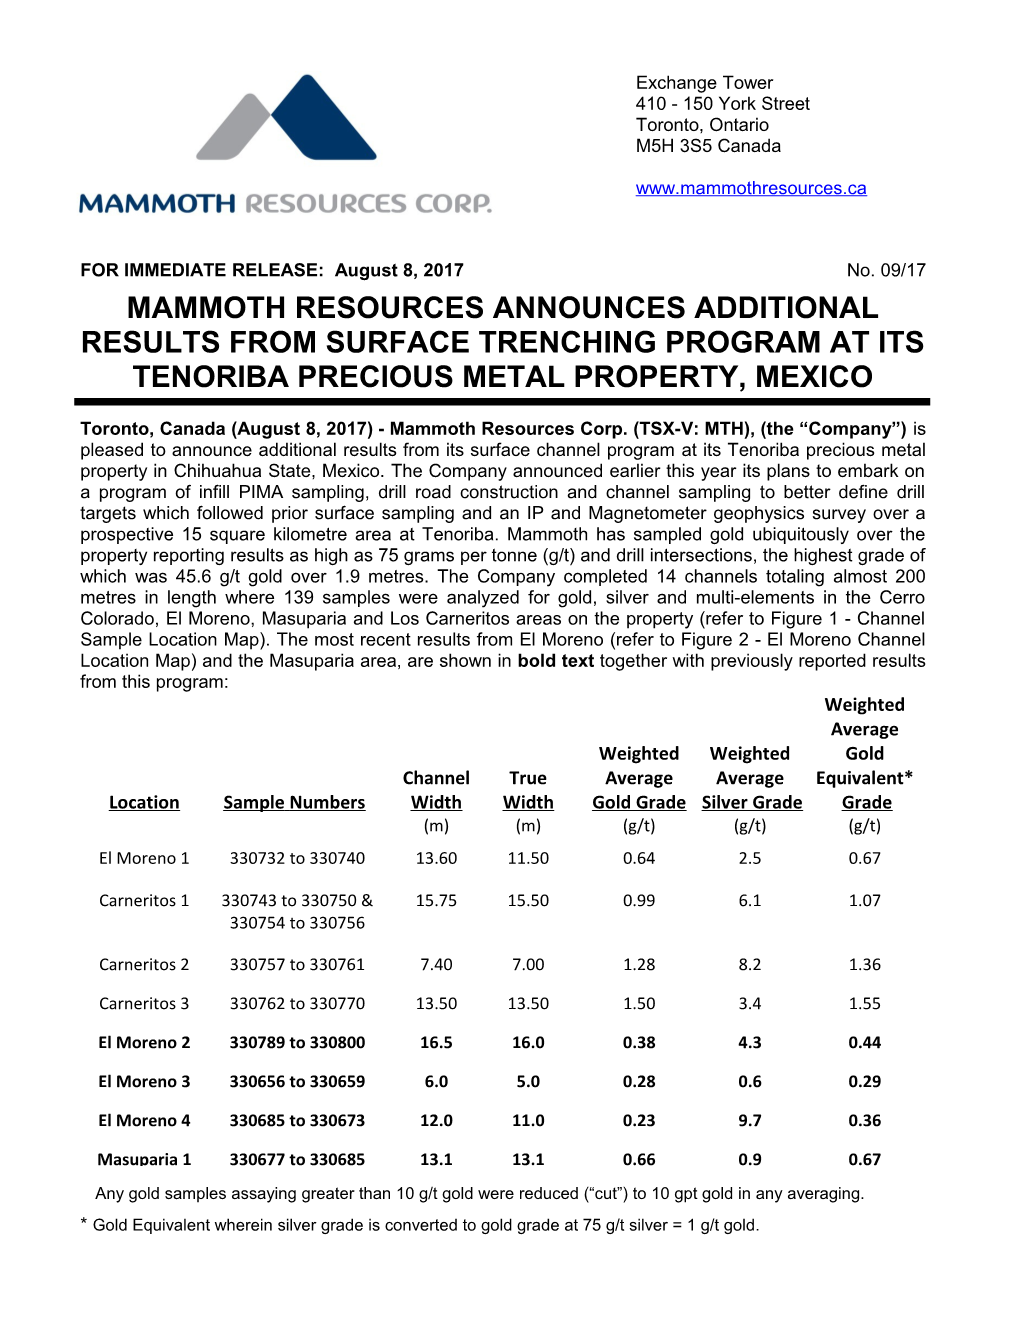 Mammoth Resources Announces Additional Results from Surface Trenching Program at Its Tenoriba